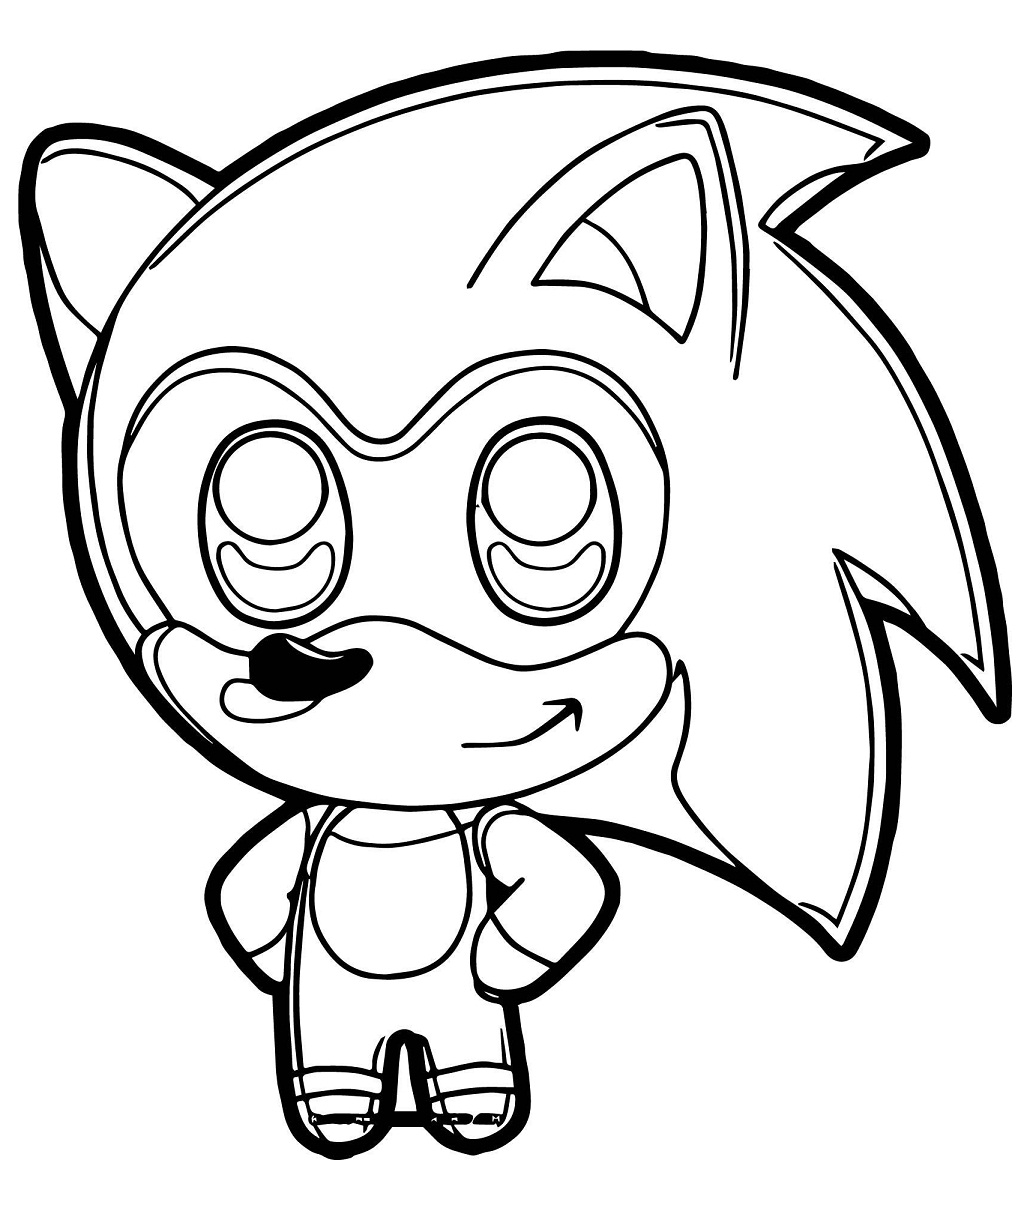 Werehog Sonic Coloring Page Free Printable Coloring Pages for Kids